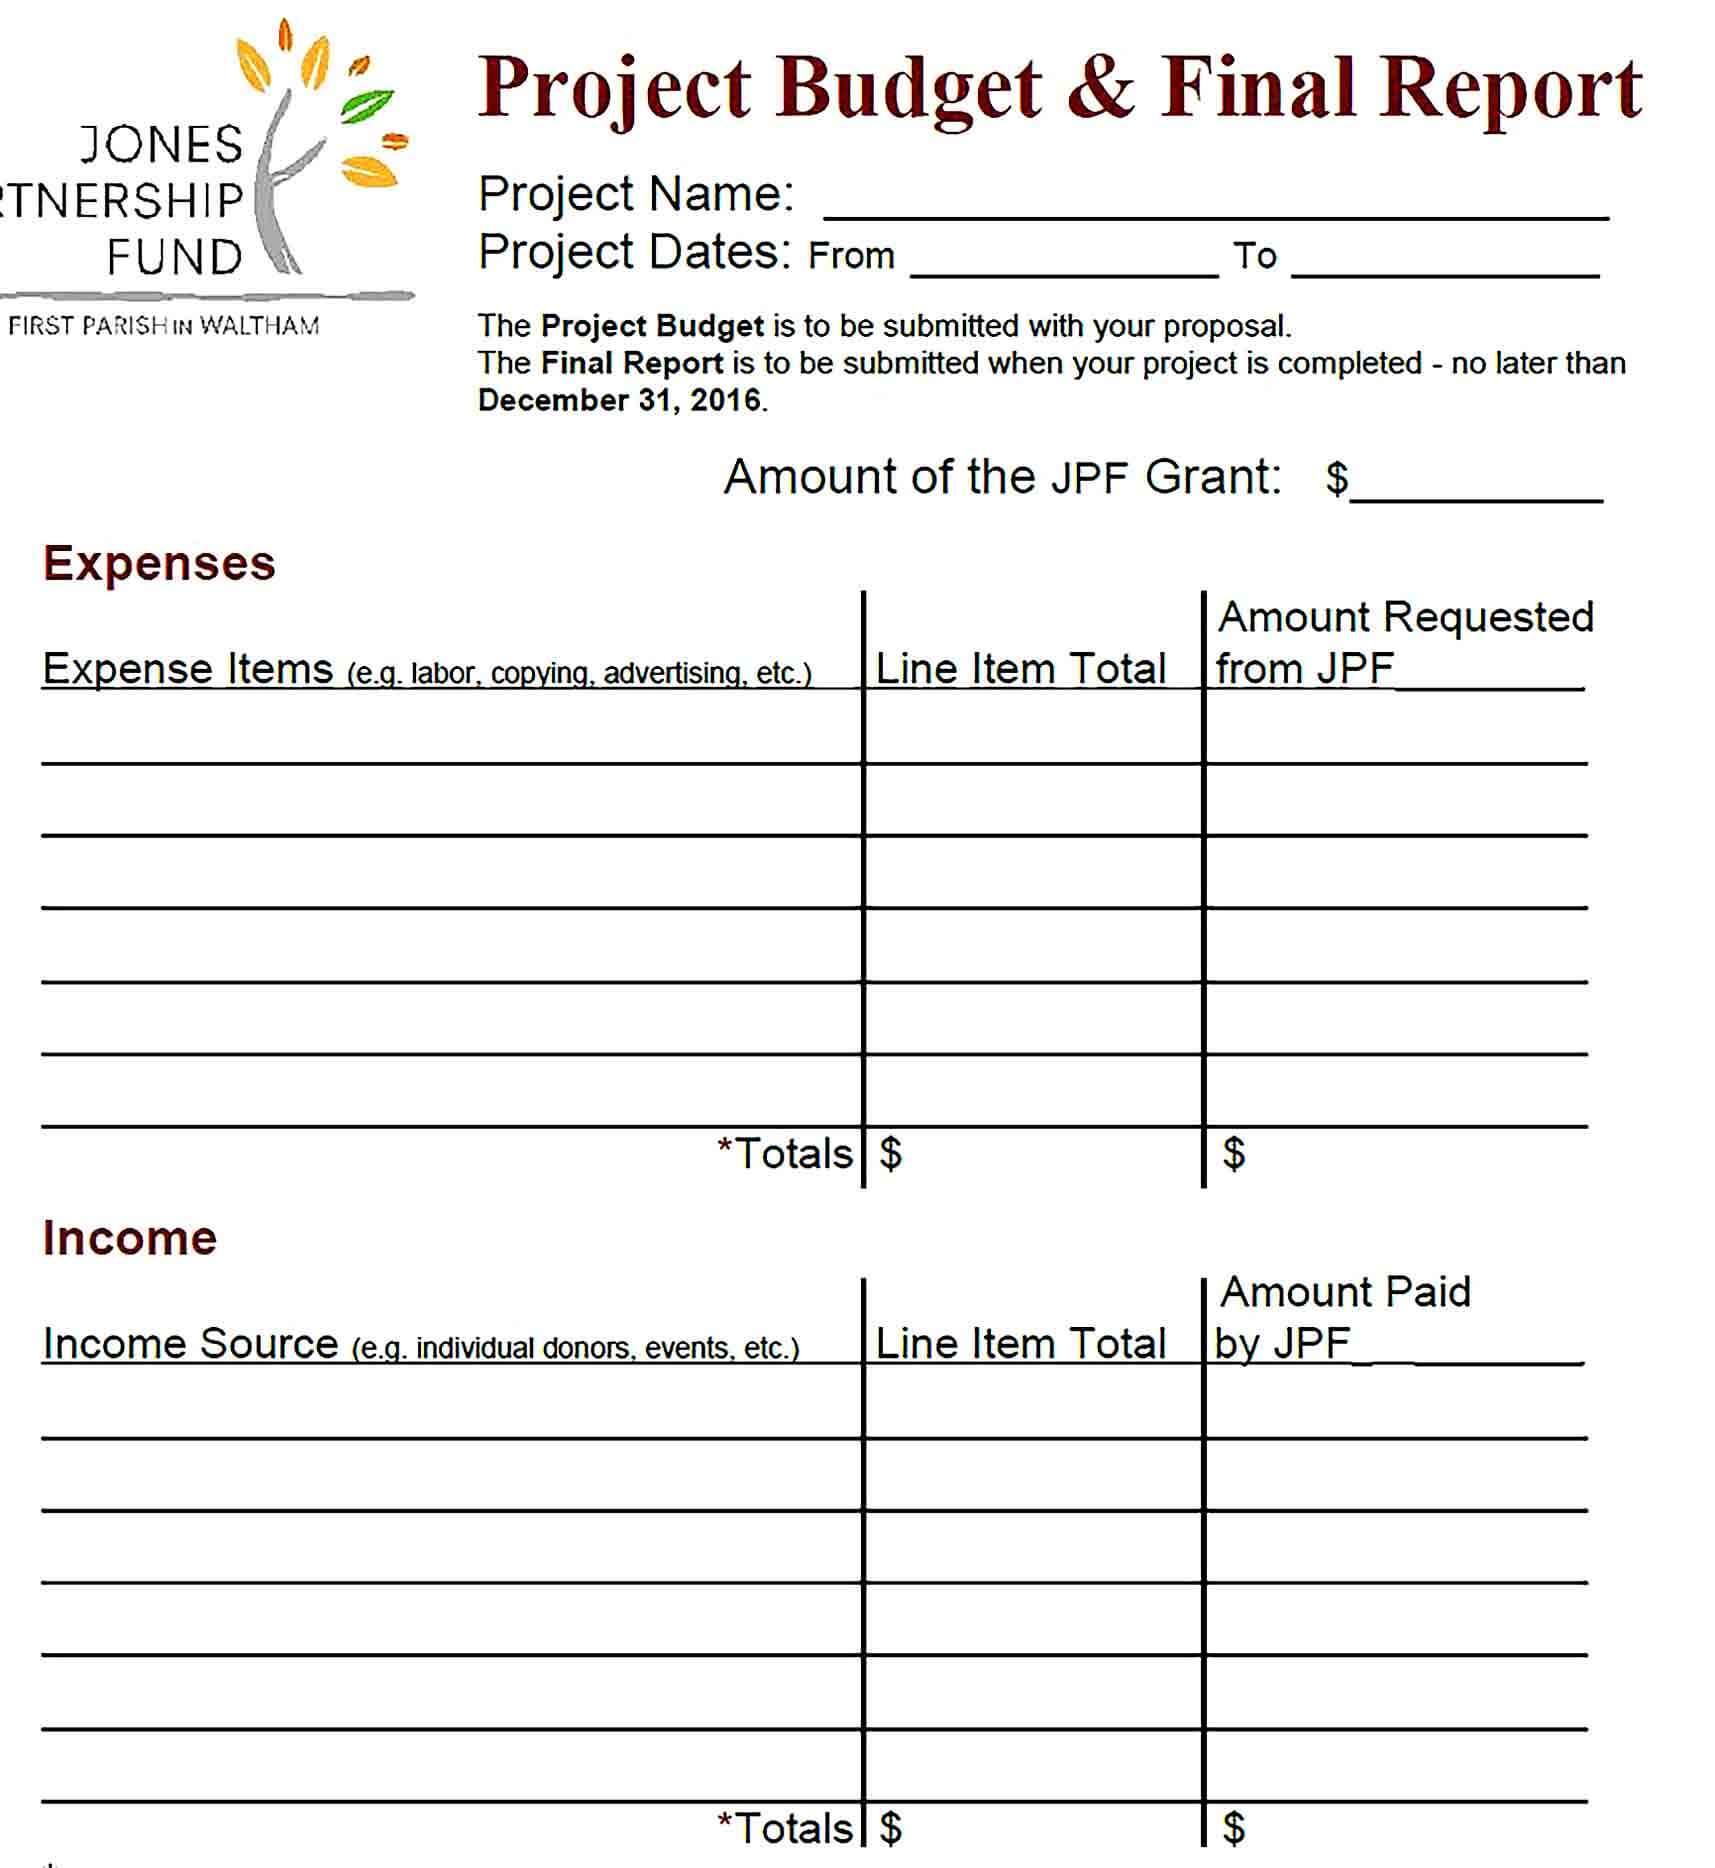 Sample Final Project Budget Report